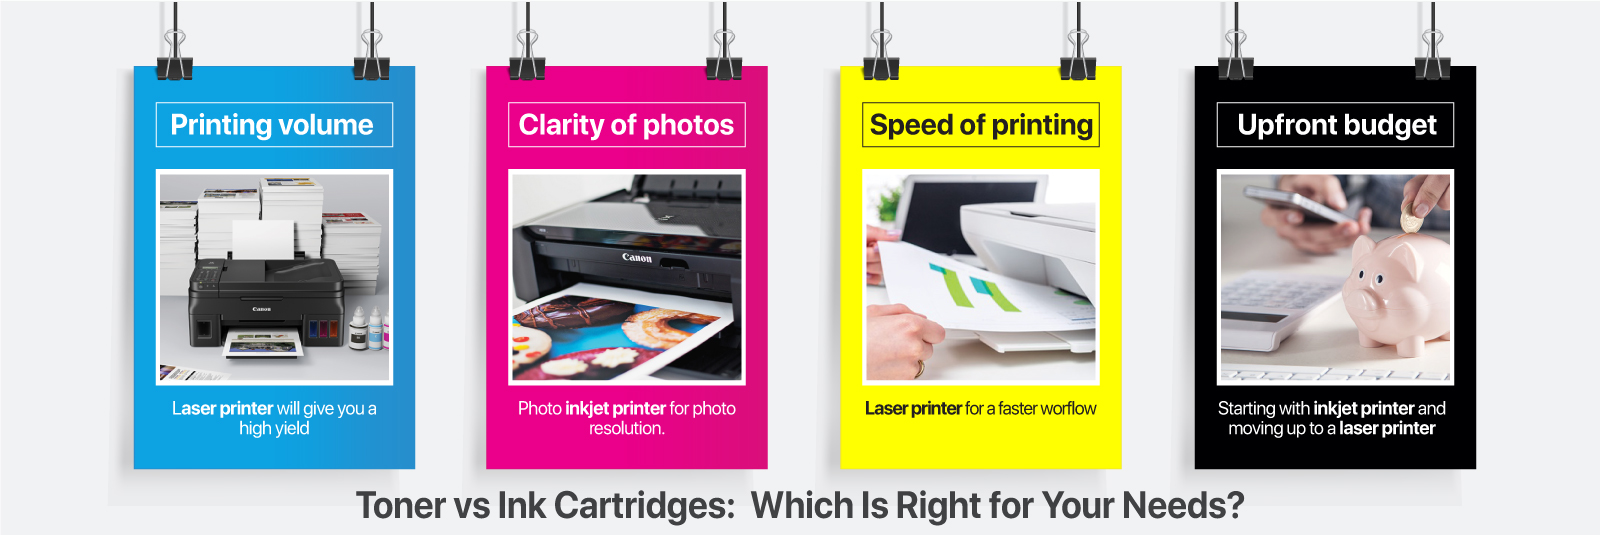 Toner vs Ink Cartridges: Which Is Right for Your Needs?